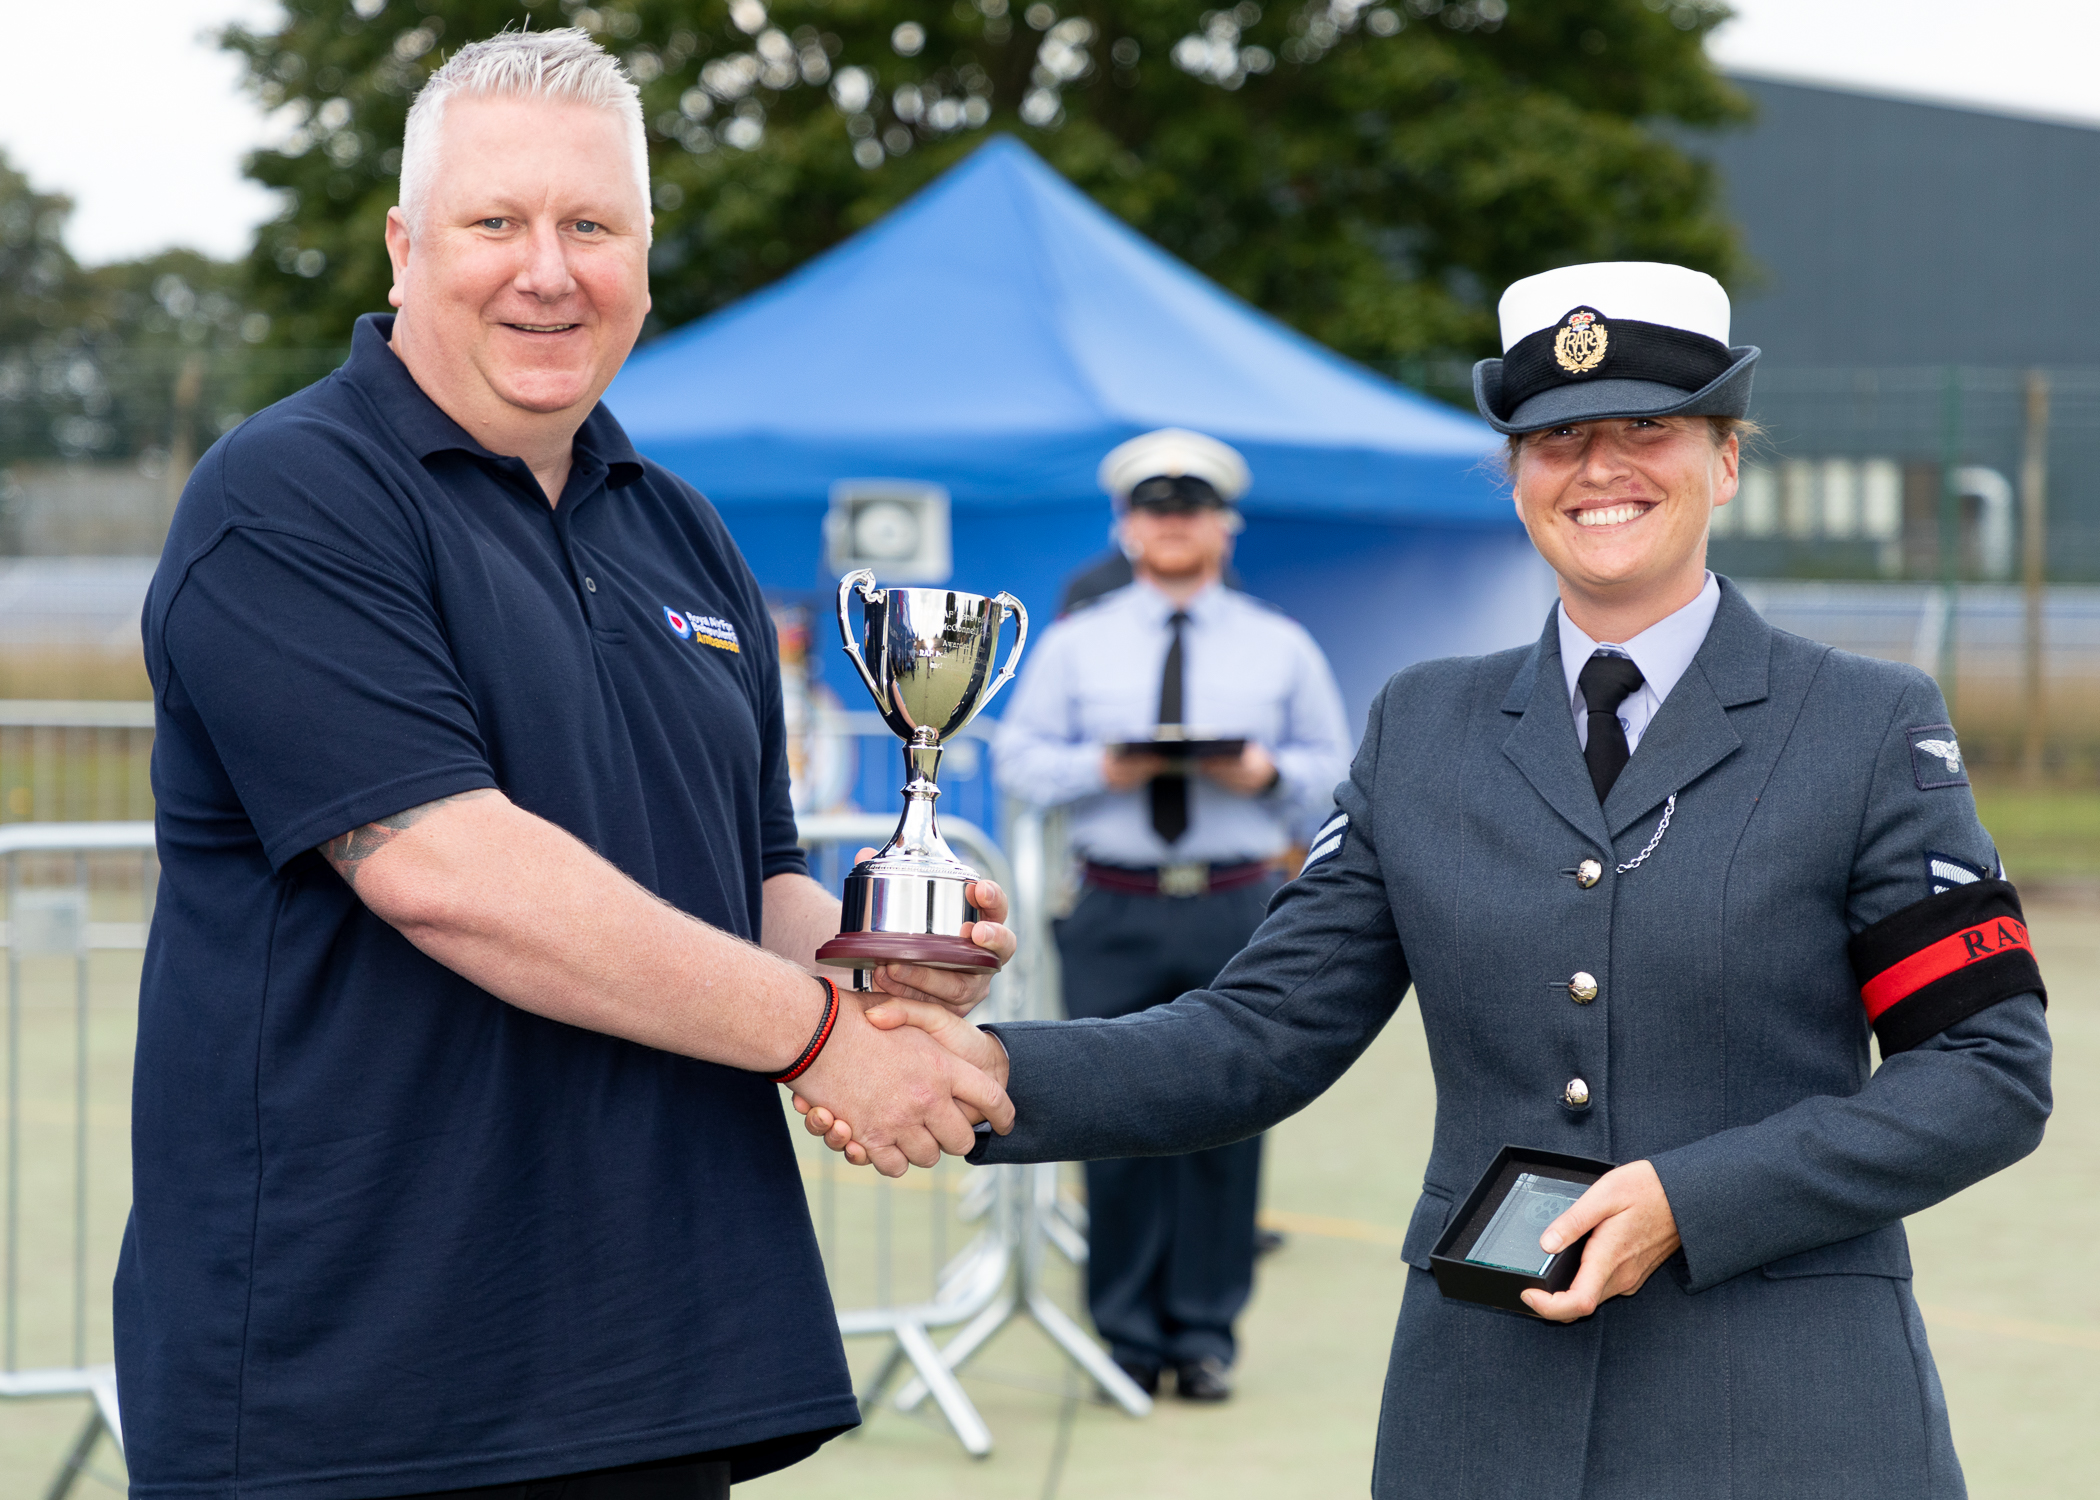 RAF Police Handler shakes hands while being awarded trophy.